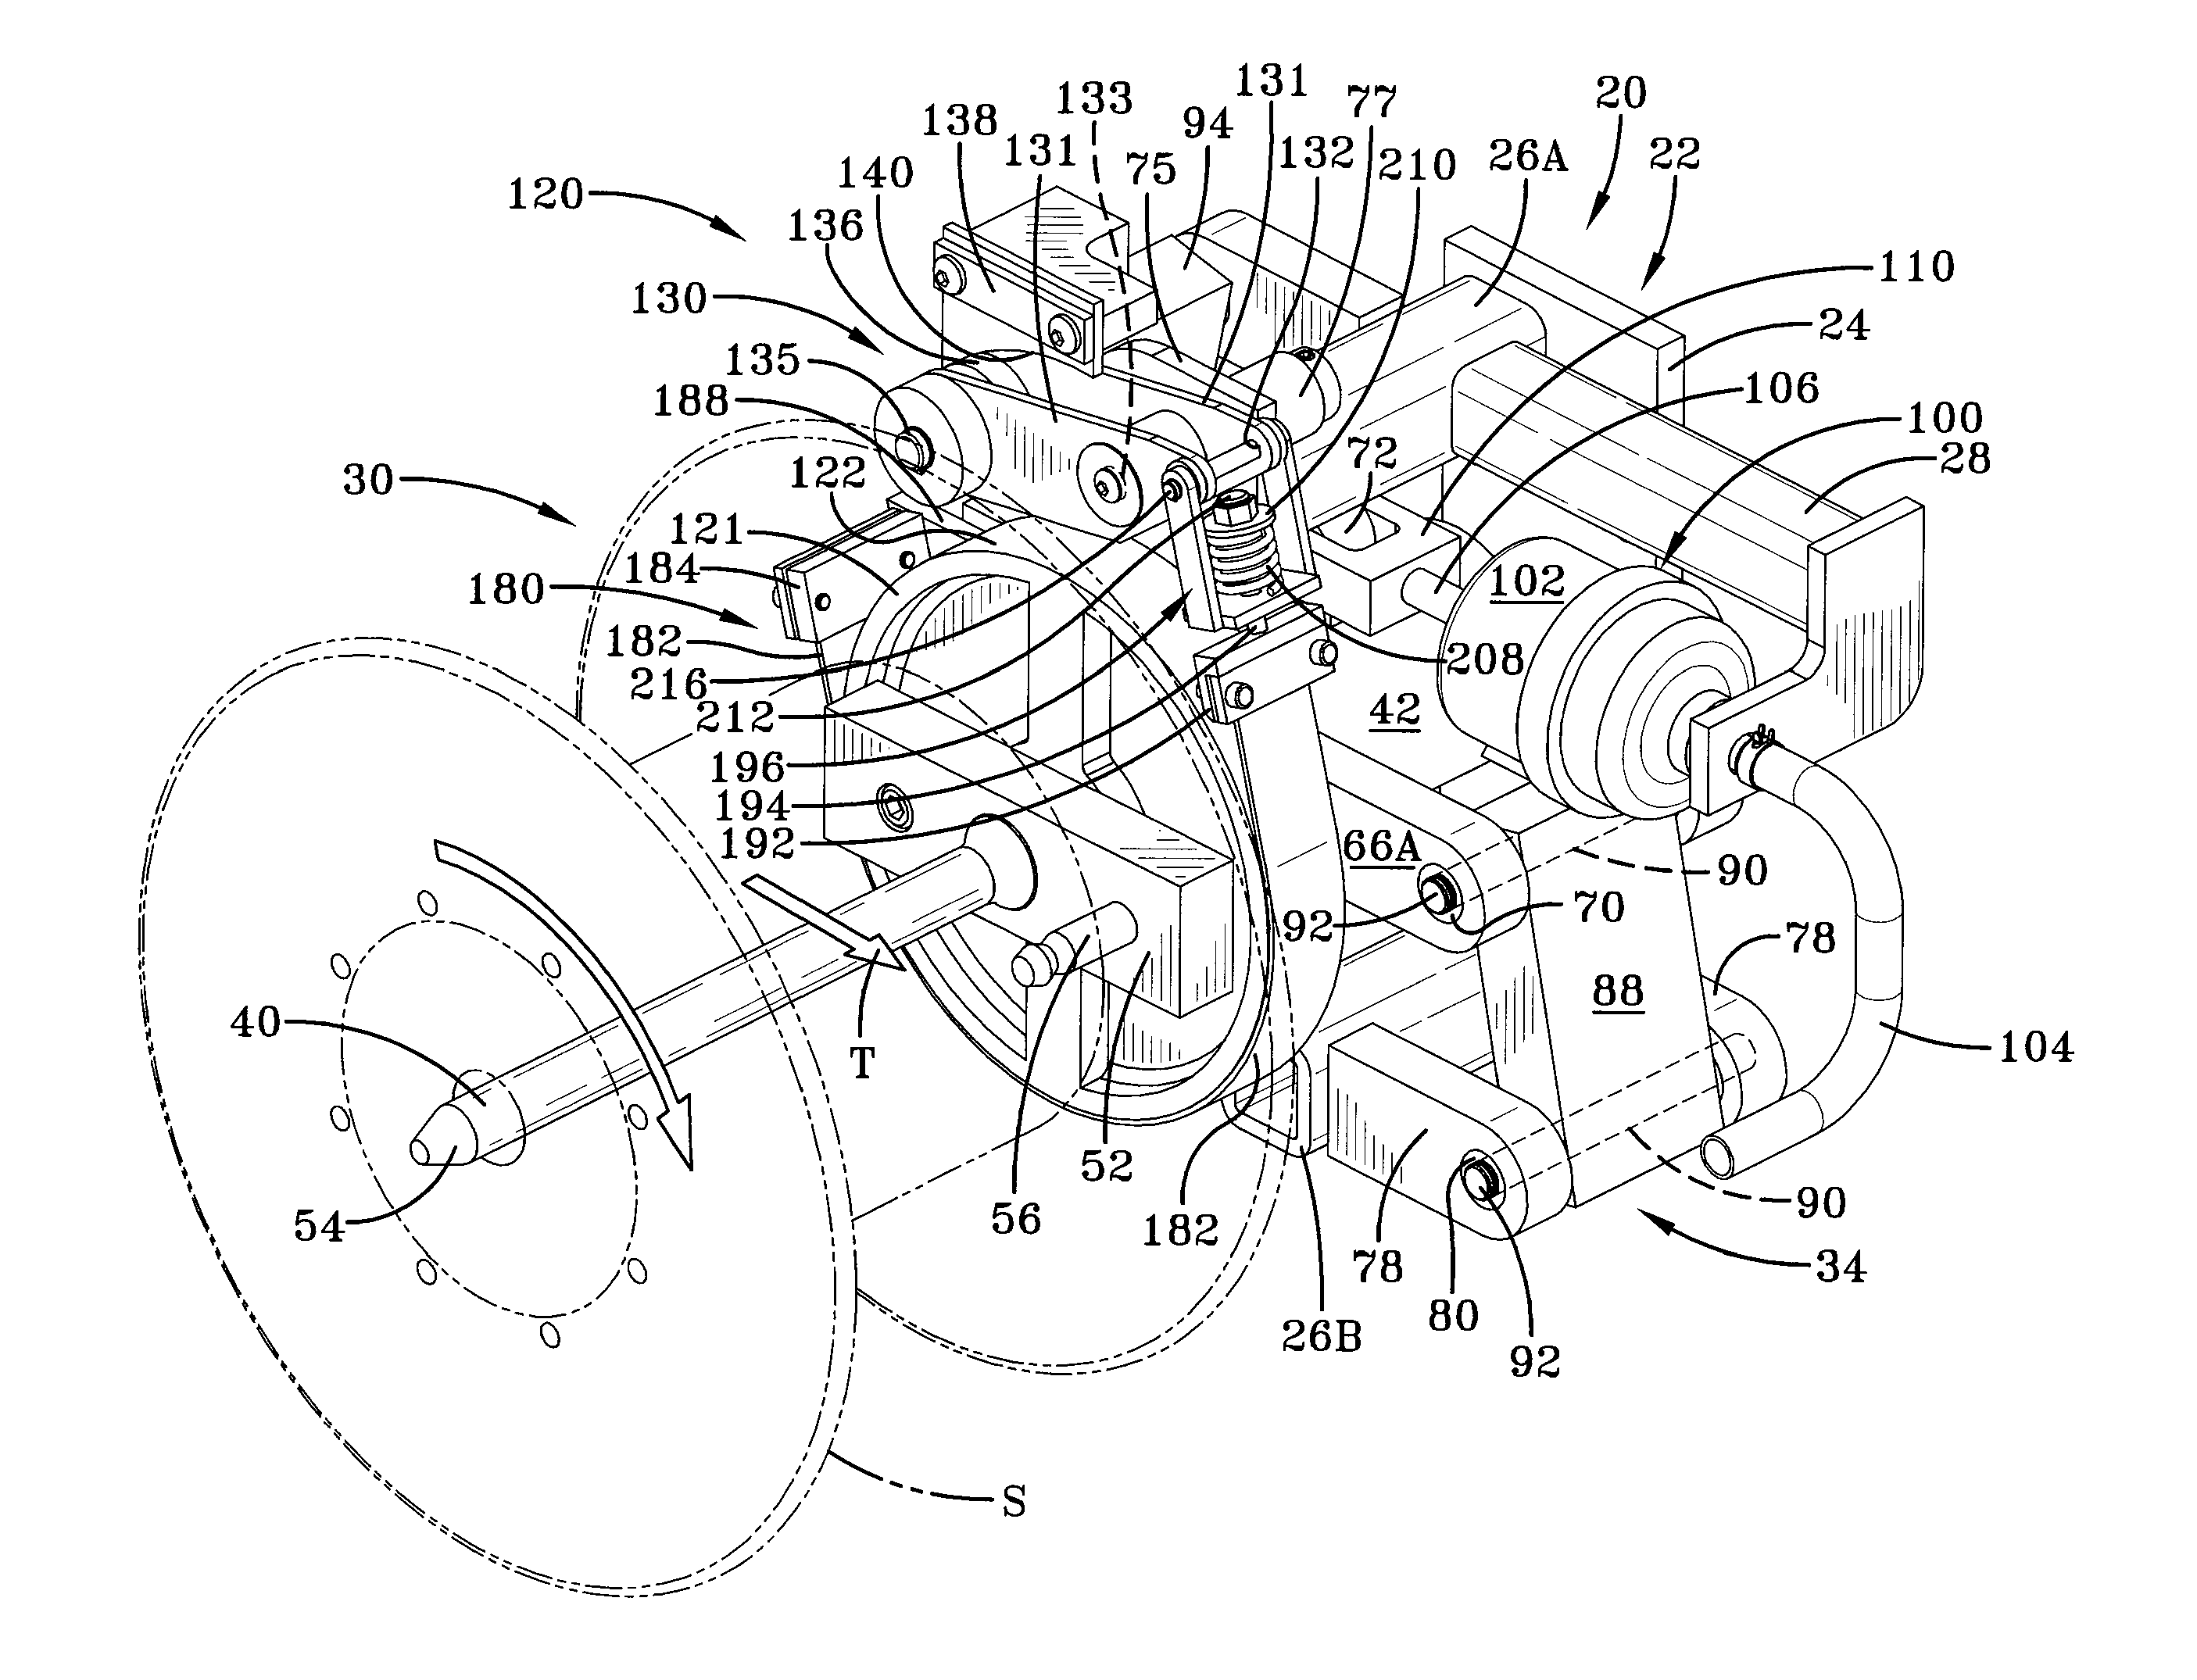 Self-compensating filament tension control device with friction band braking